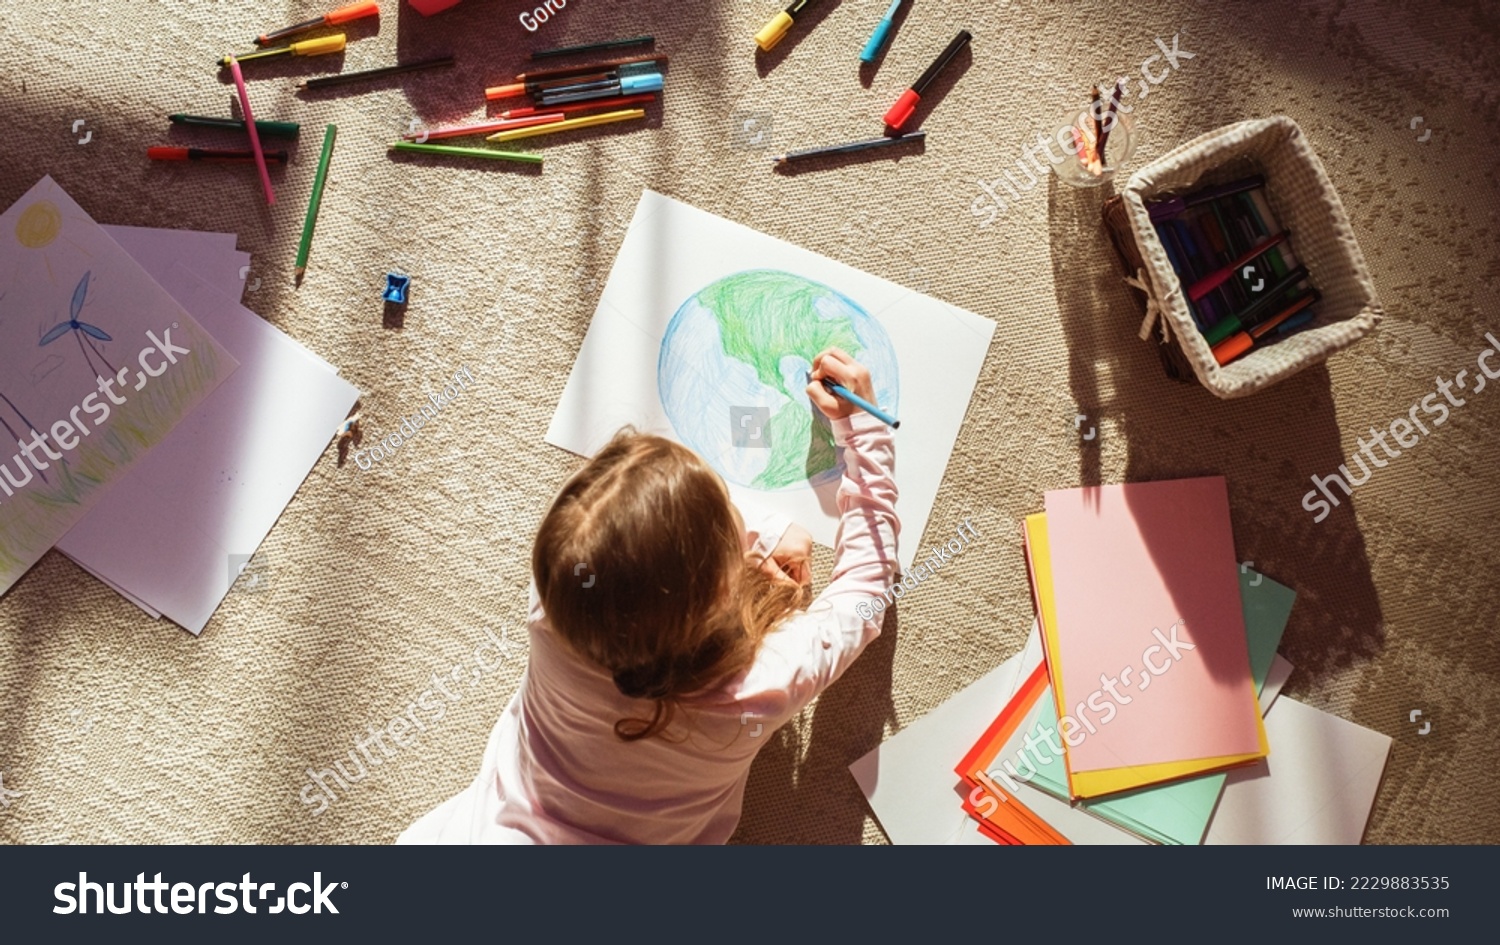 Top View: Little Girl Drawing Our Beautiful Green Planet Earth. Child Having Fun at Home on the Floor, Imagining Our Planet as a Happy Place with Clean, Sustainable Living. Cozy Sunny Day. #2229883535